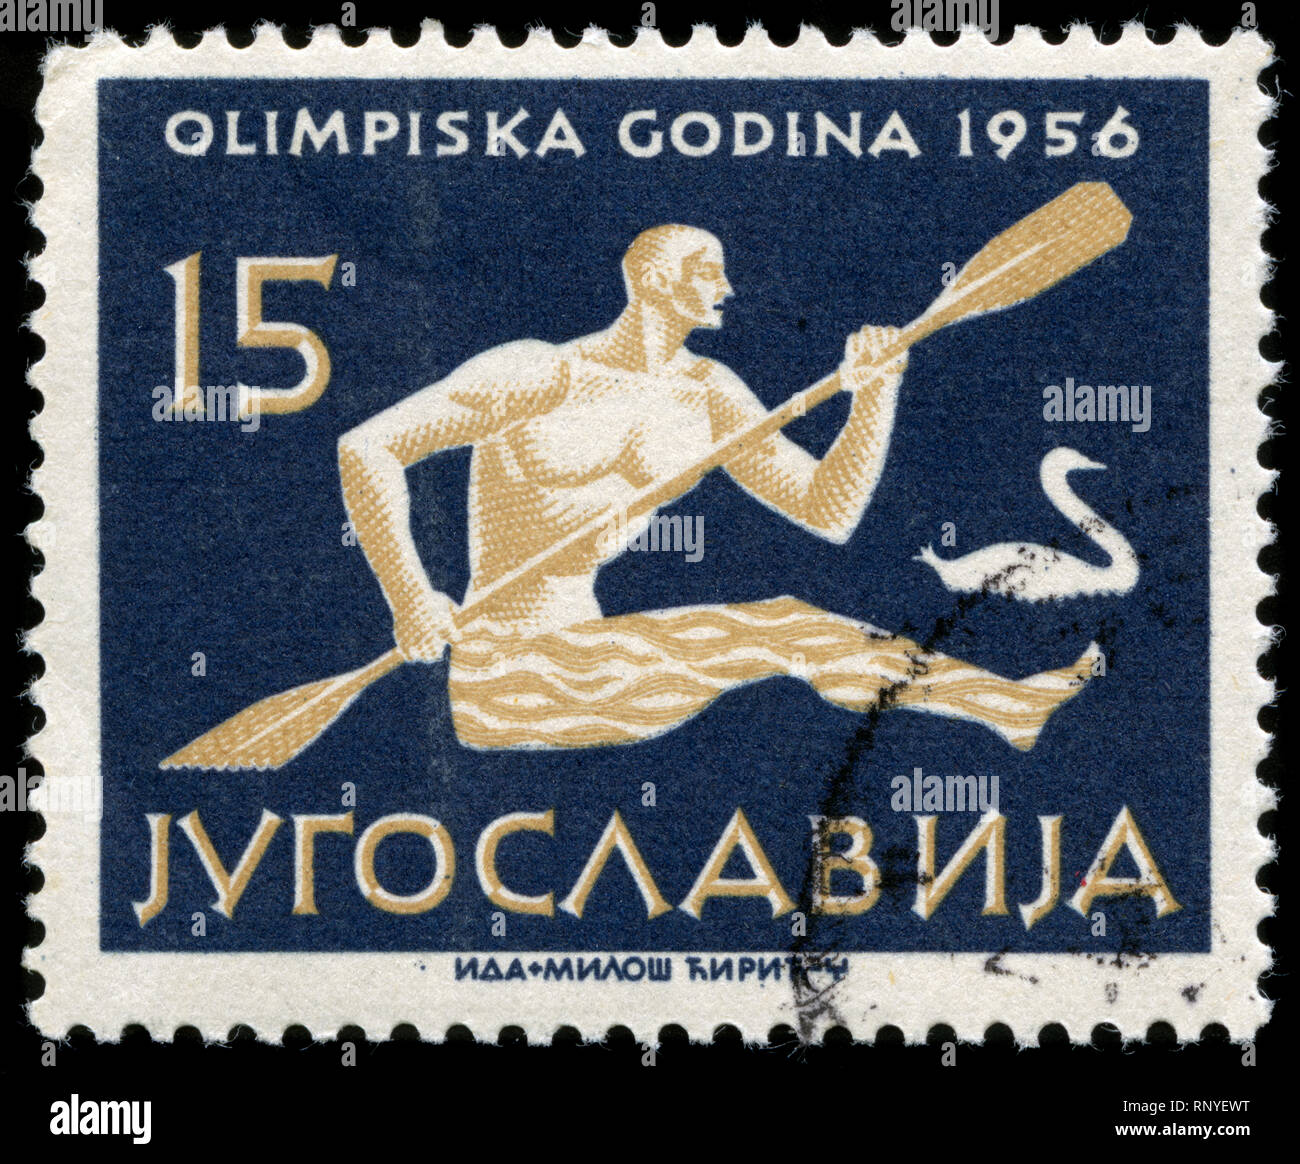 Postage stamp from the former state of Yugoslavia in the Olympic Games Melbourne series issued in 1956 Stock Photo